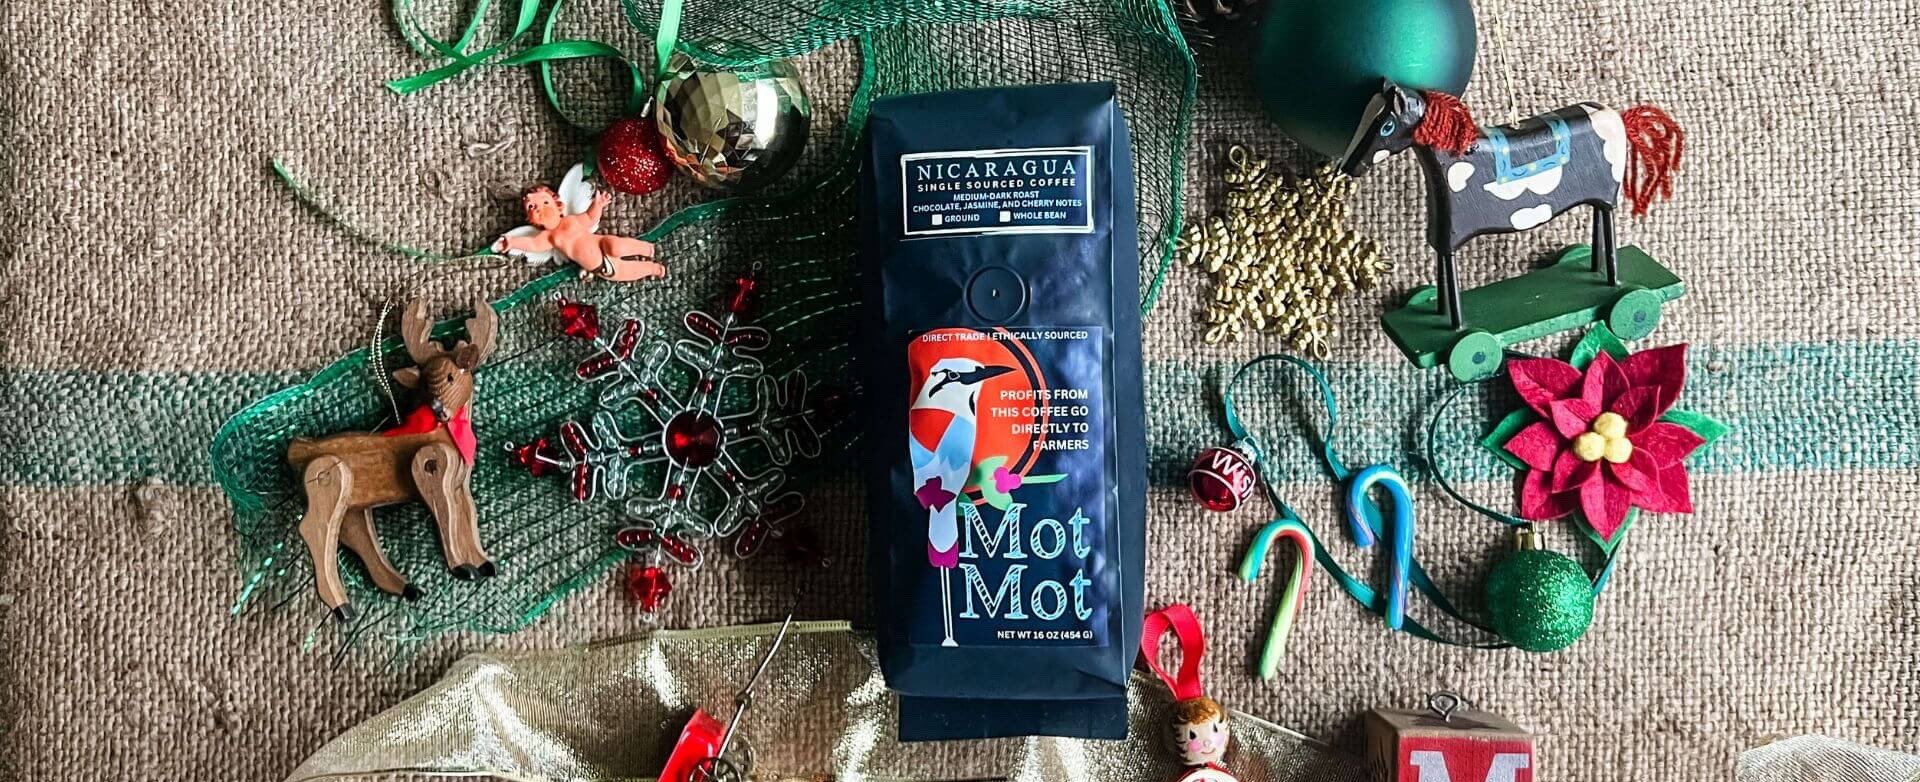 MotMot Coffee holiday banner - cropped